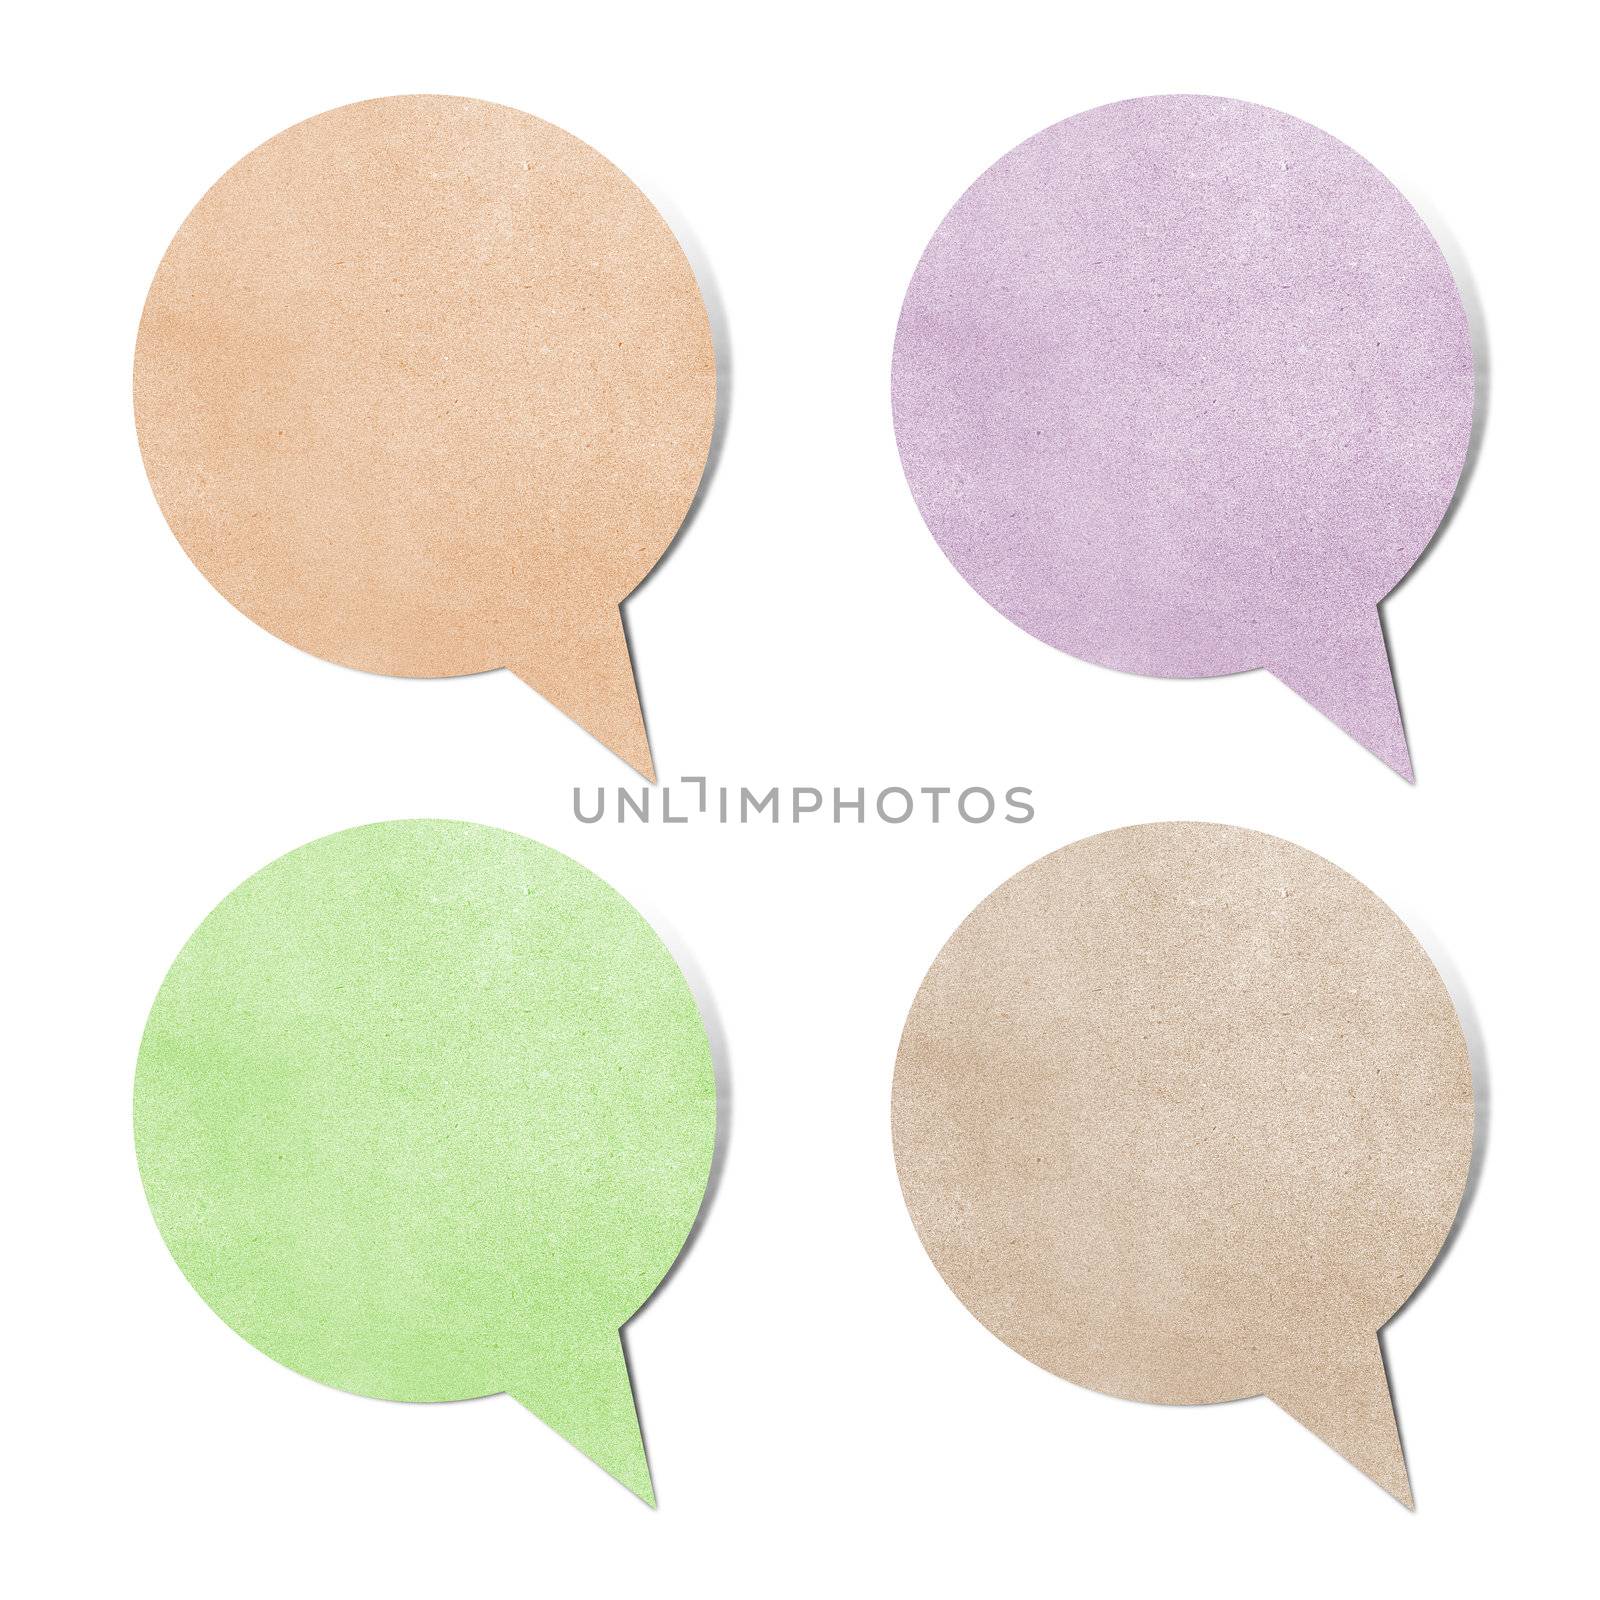 Paper texture ,bubble talk tag on white background